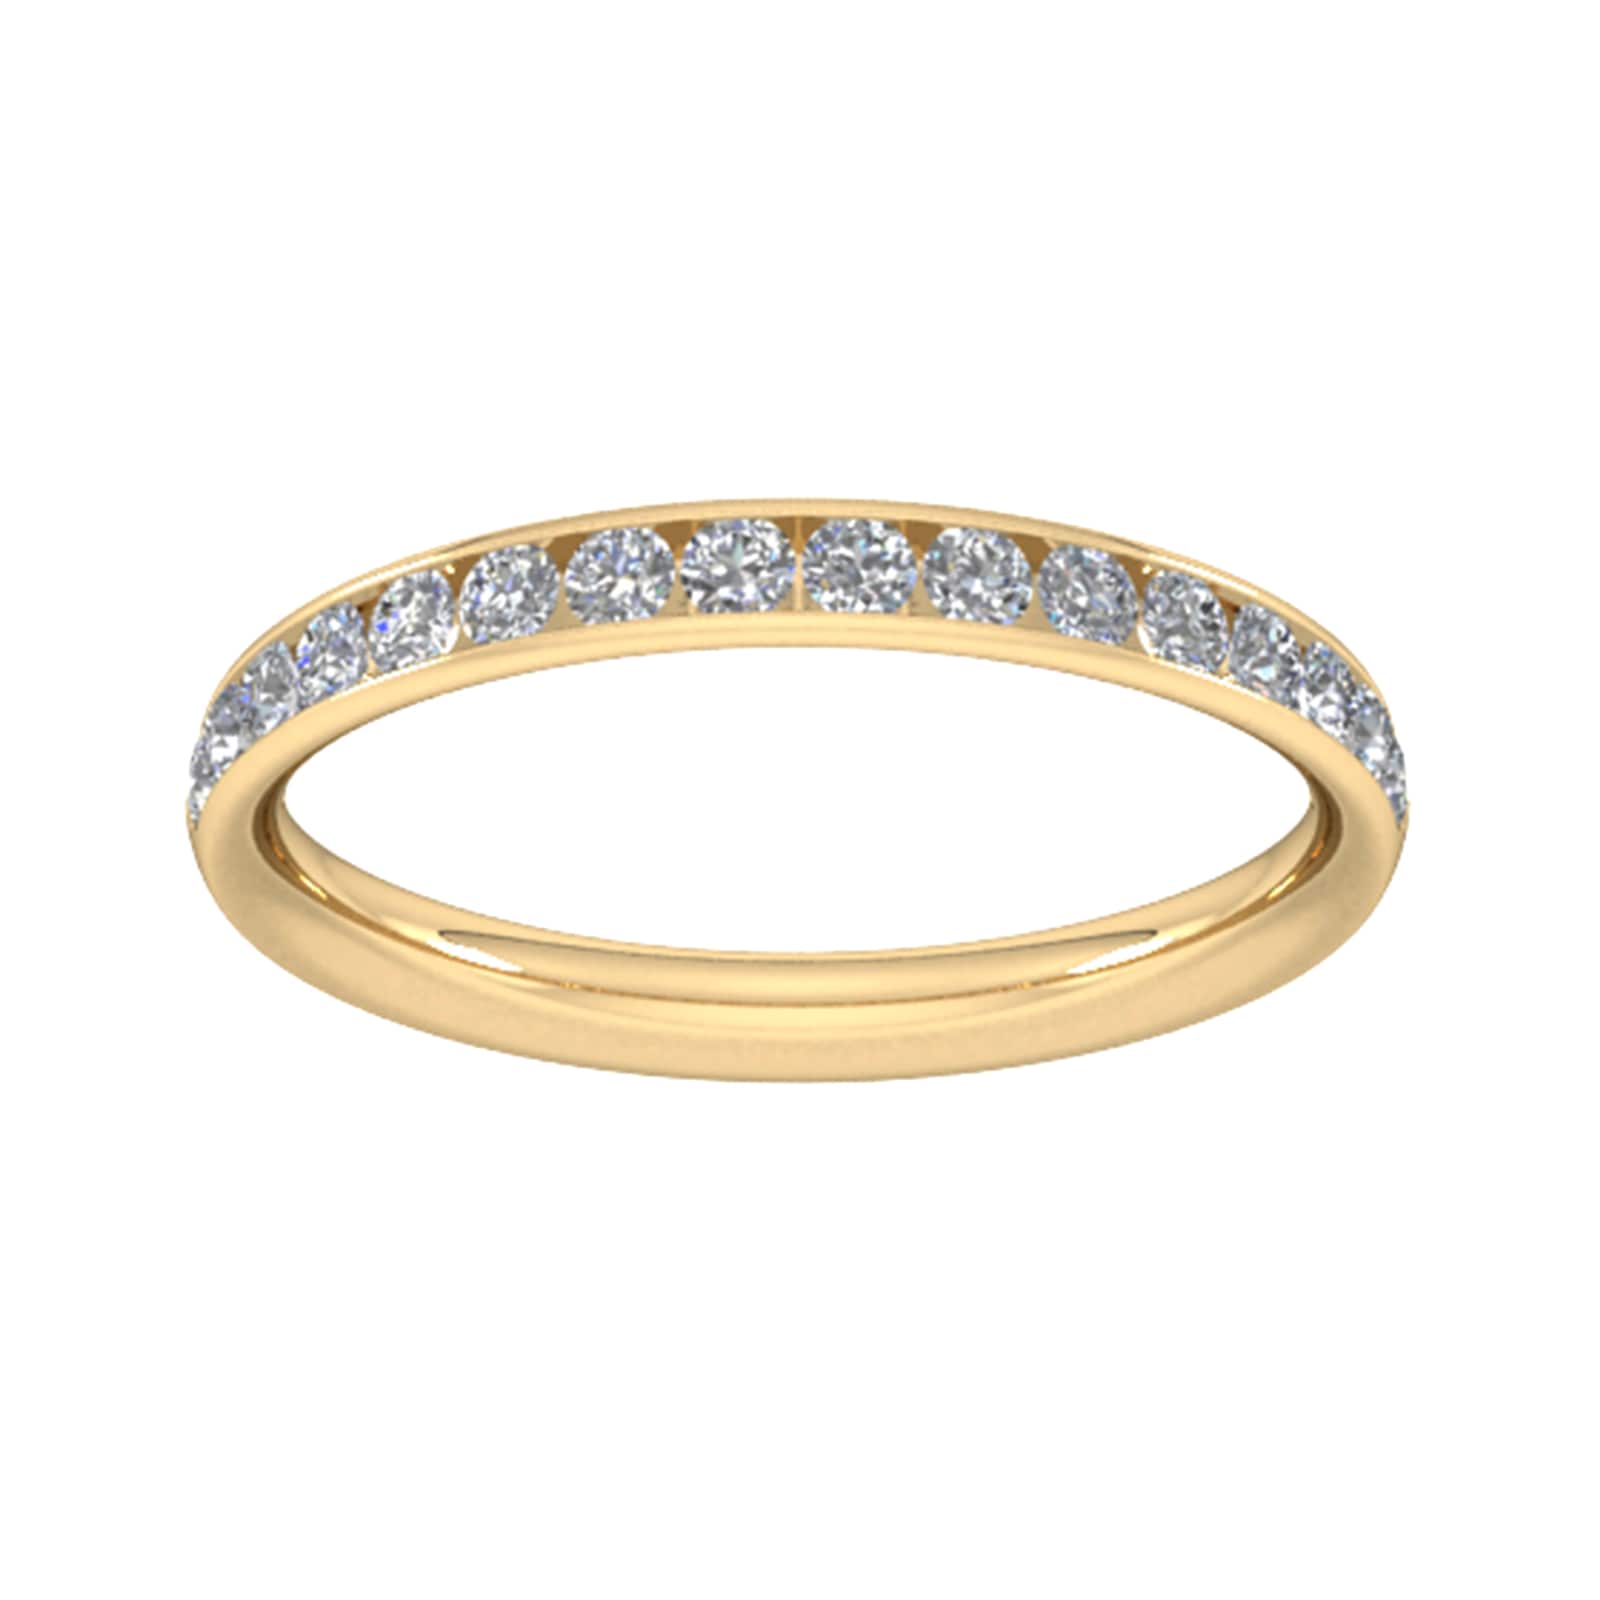 0.44 Carat Total Weight Half Channel Set Brilliant Cut Diamond Wedding Ring In 9 Carat Yellow Gold - Ring Size N